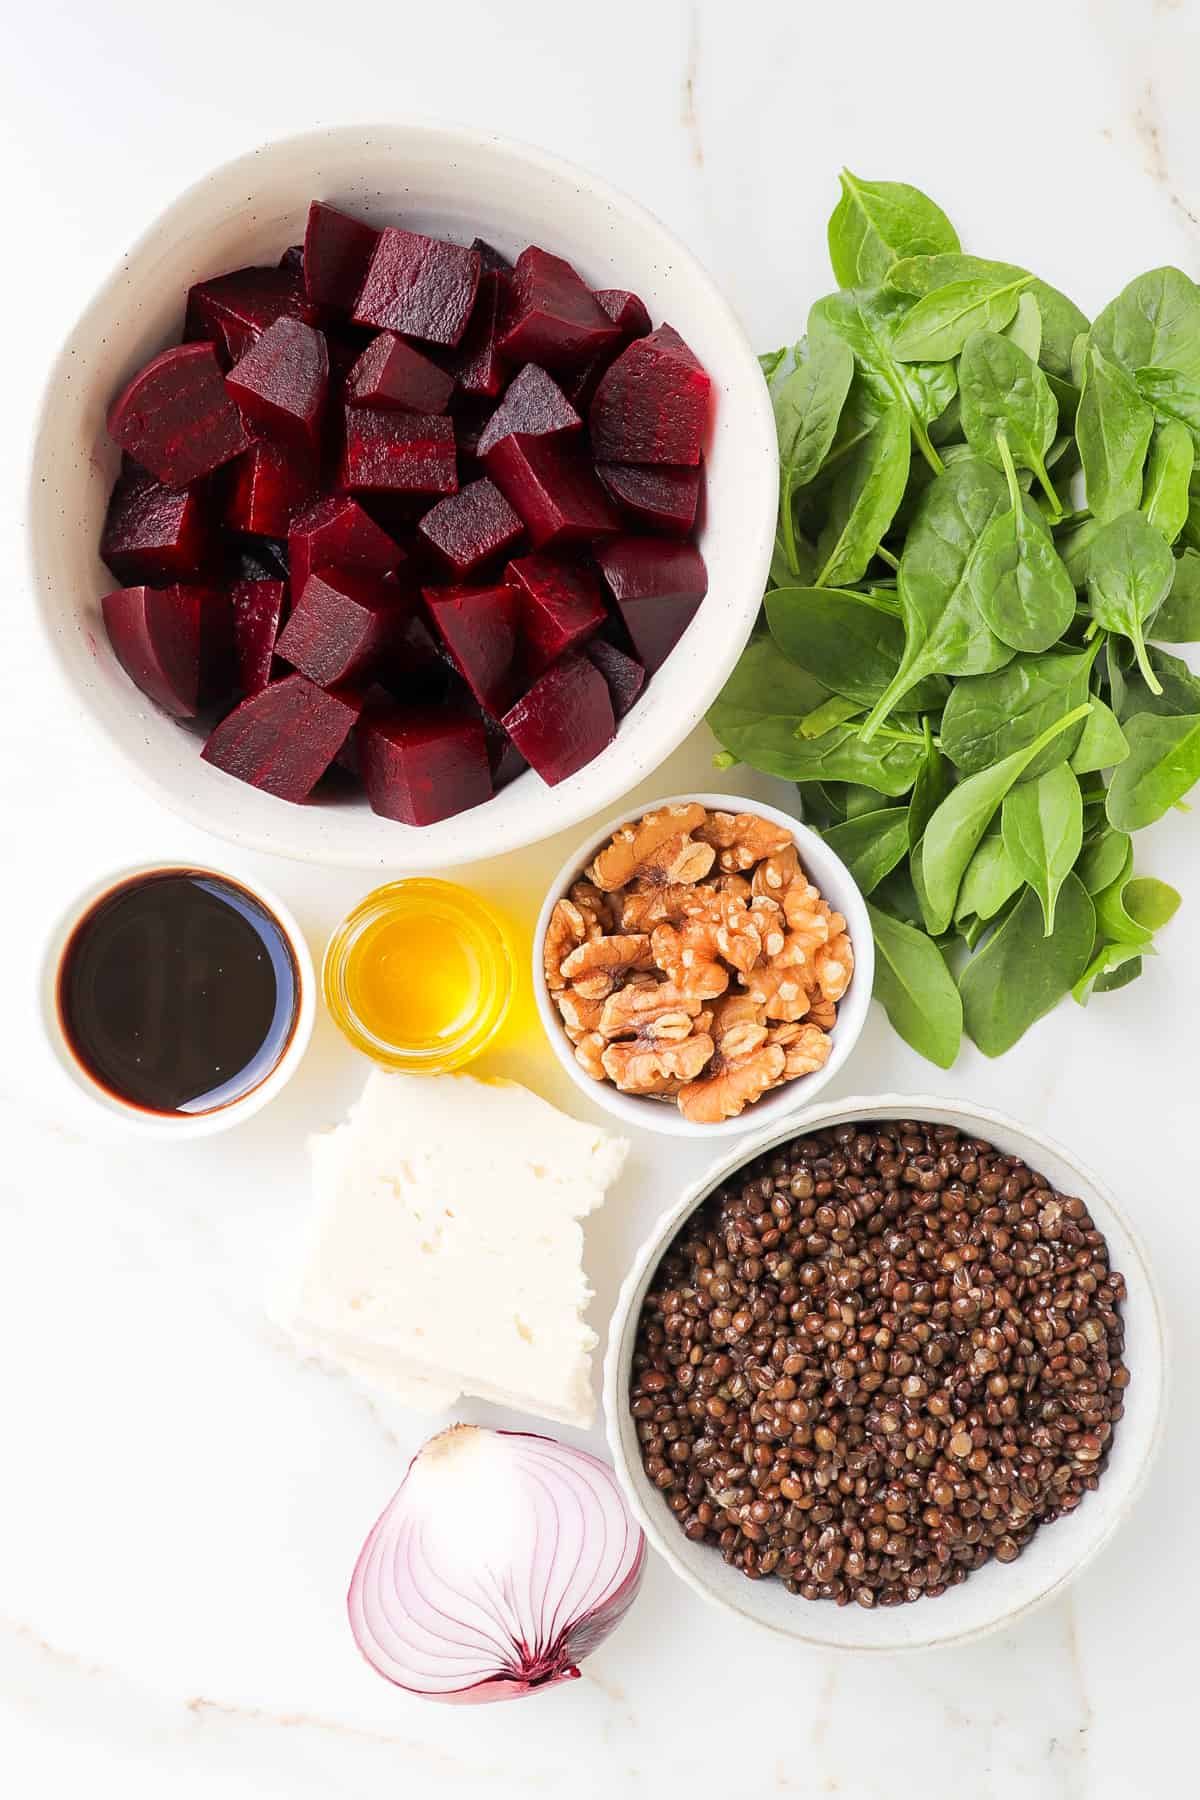 Ingredients shown to make the beetroot salad.